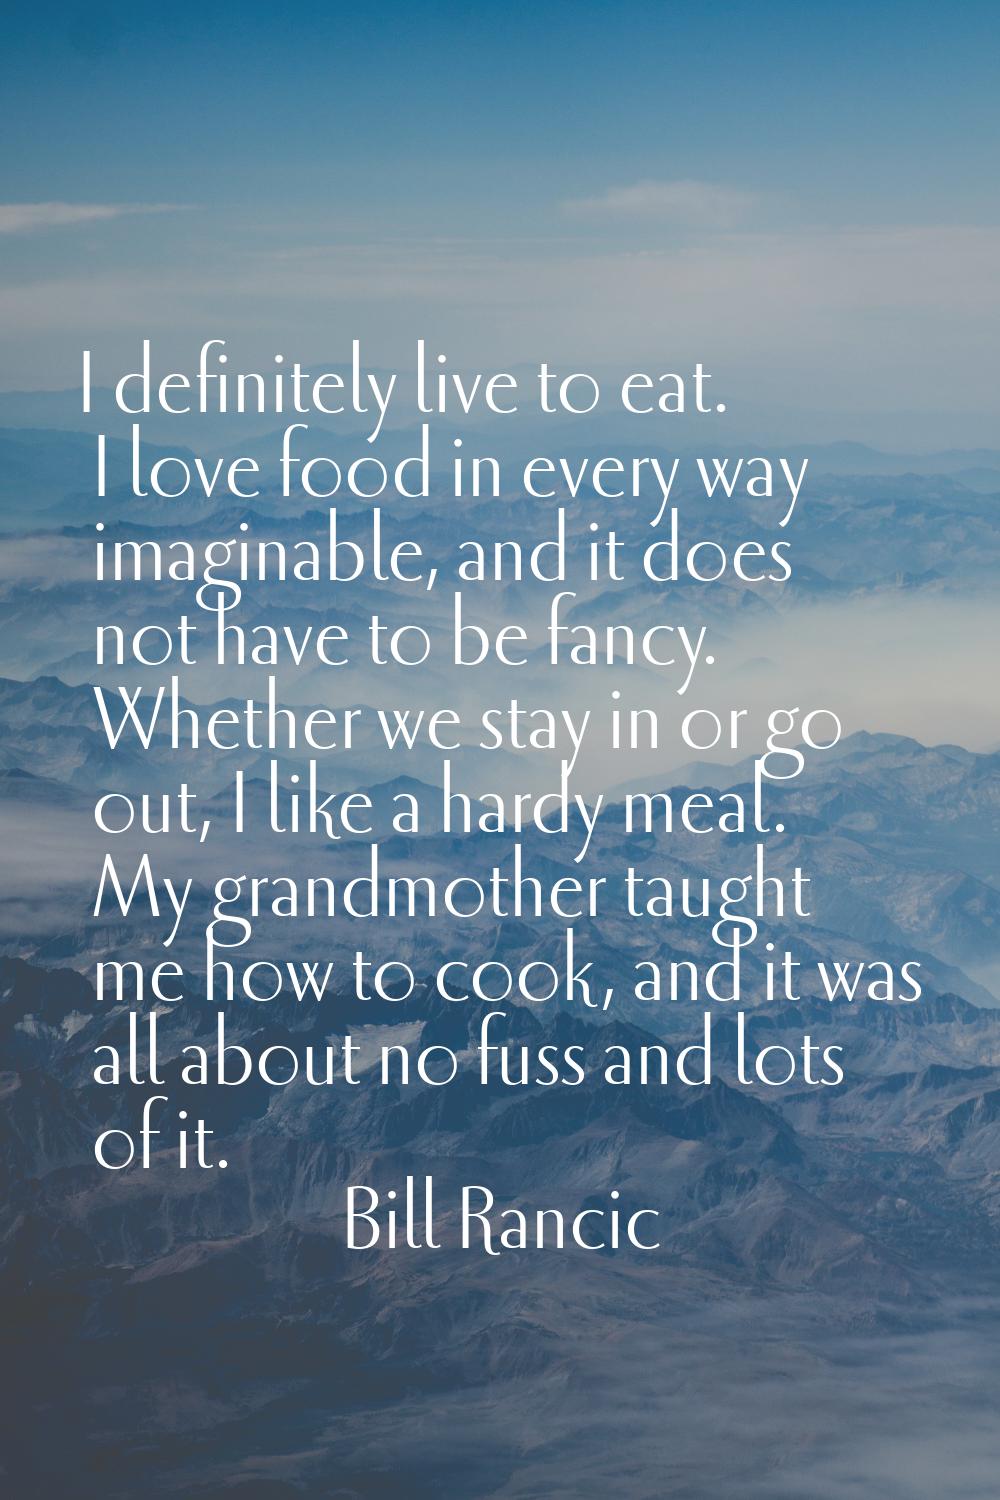 I definitely live to eat. I love food in every way imaginable, and it does not have to be fancy. Wh